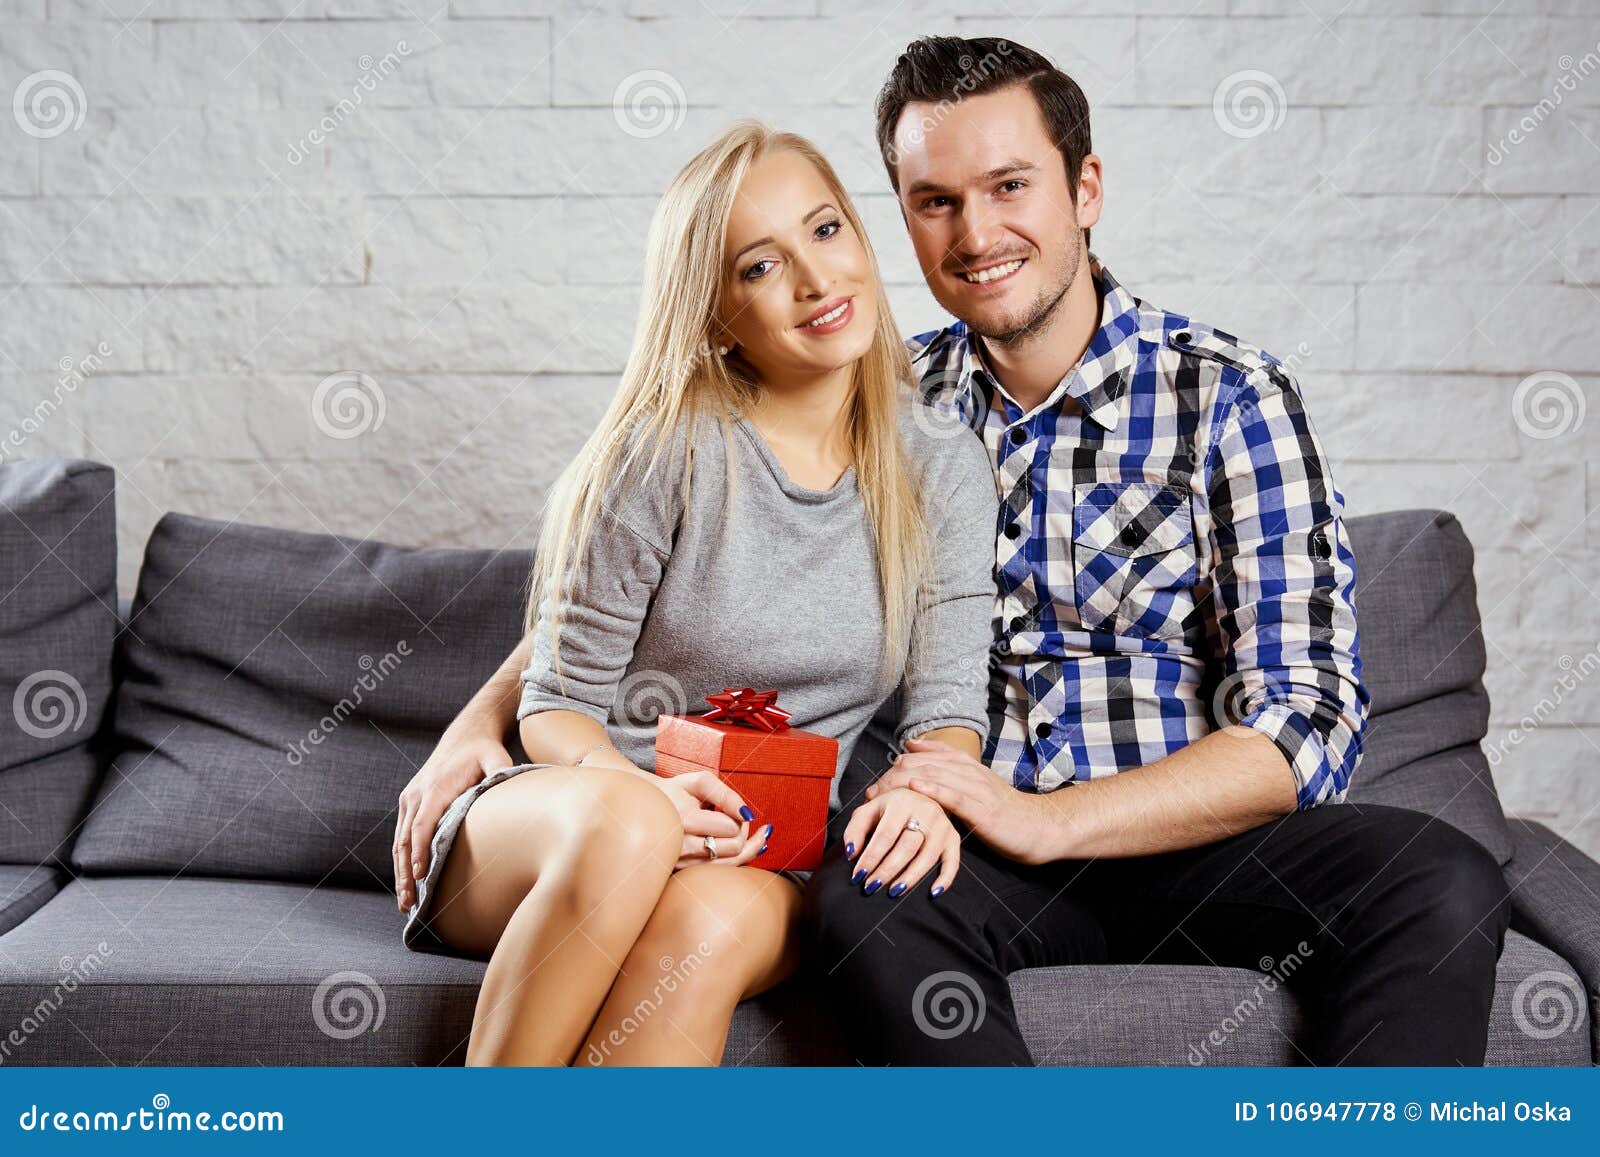 Couple embracing each other while kneeling on bed at home stock photo